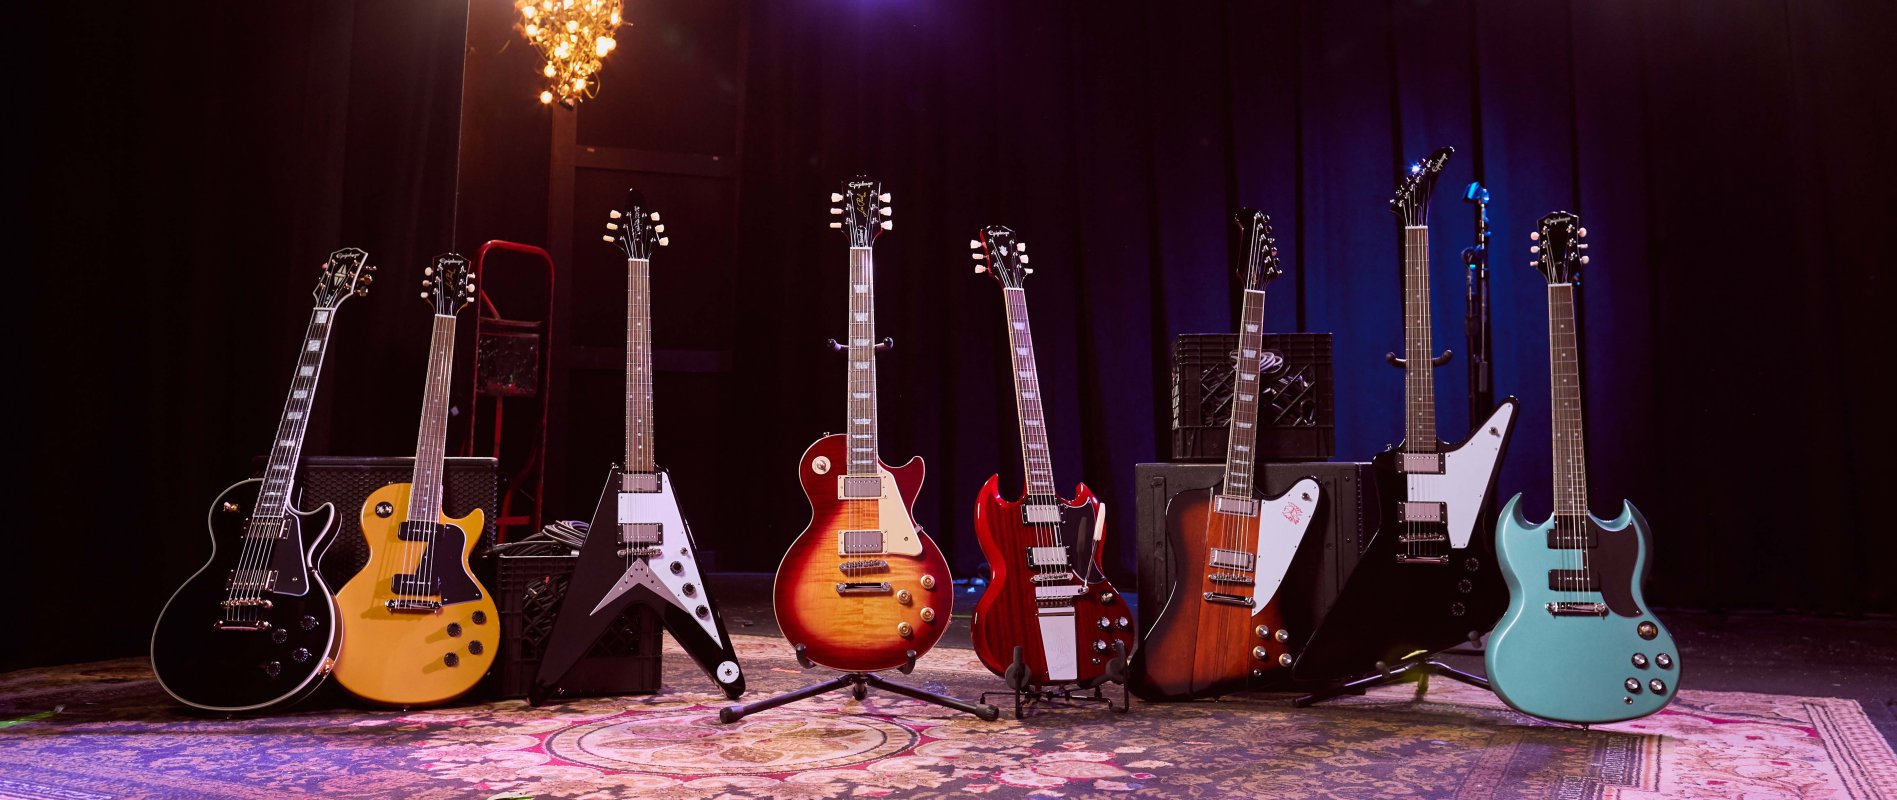 Mer information om "Epiphone Guitar Giveaway Of The Day World Tour; GibsonTV Expands Popular Guitar Giveaway Show To International Fans Starting Saturday, April 18"